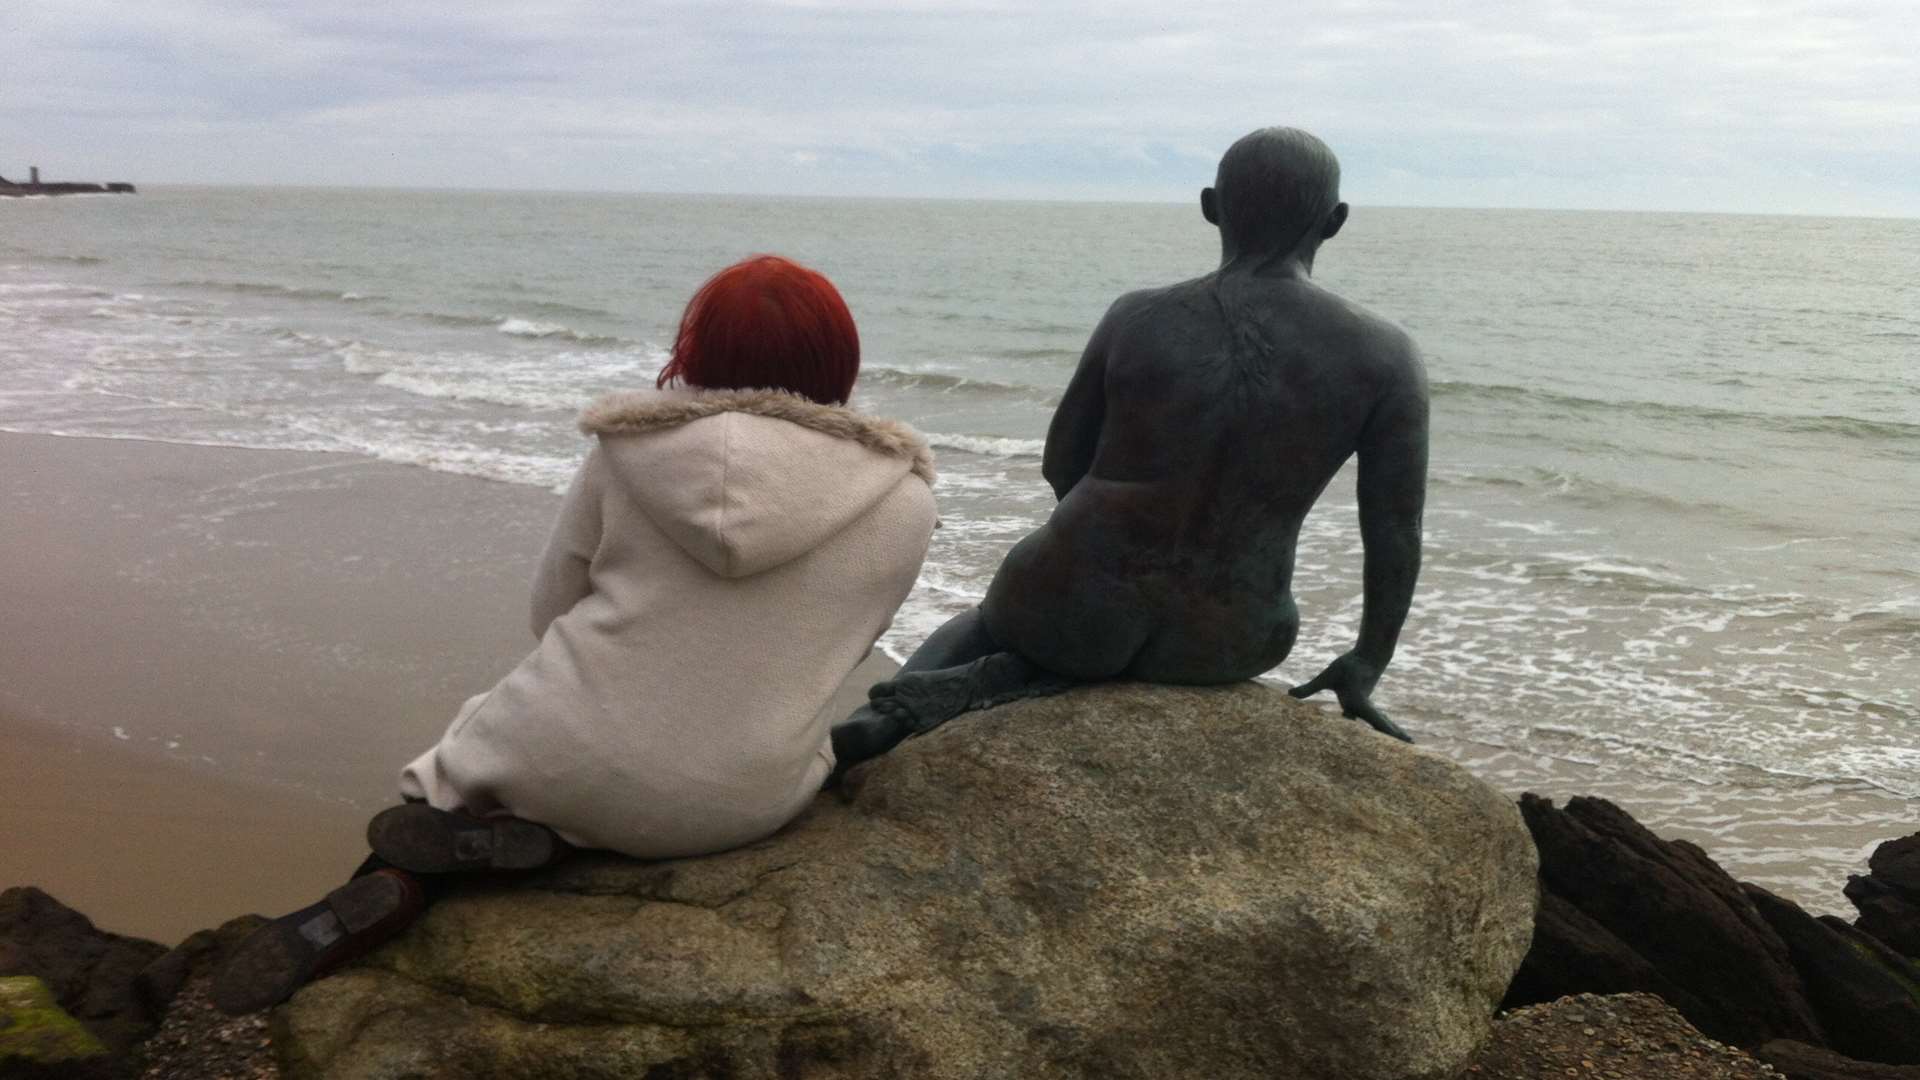 You can get close to the Mermaid at Folkestone